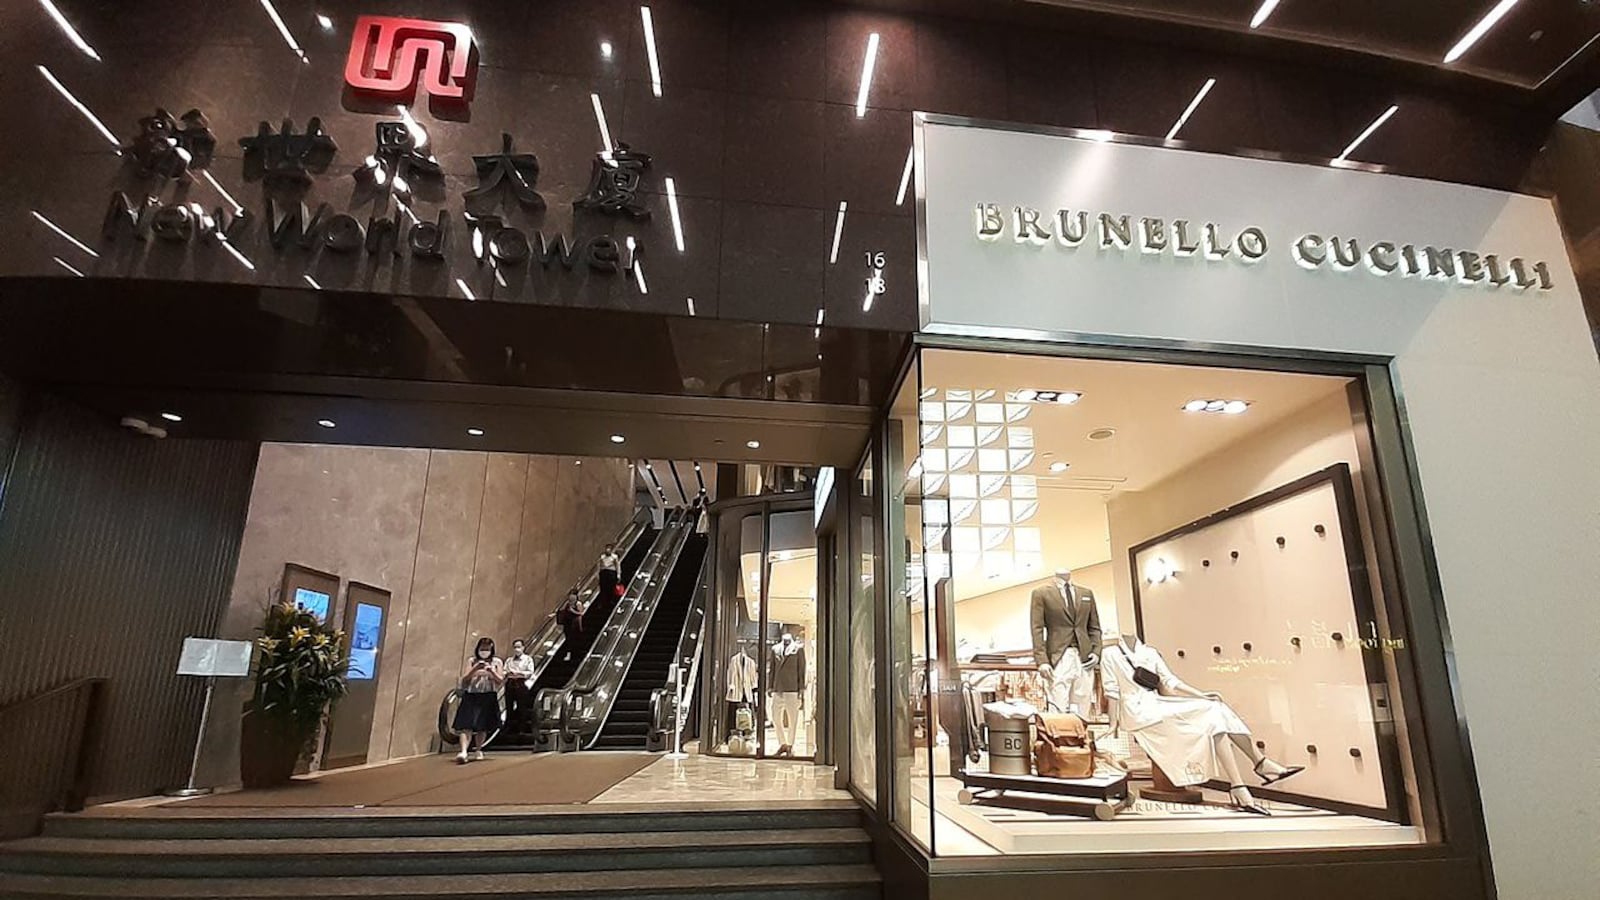 Driving Sales Through Exclusivity Takes Time, Says Brunello Cucinelli